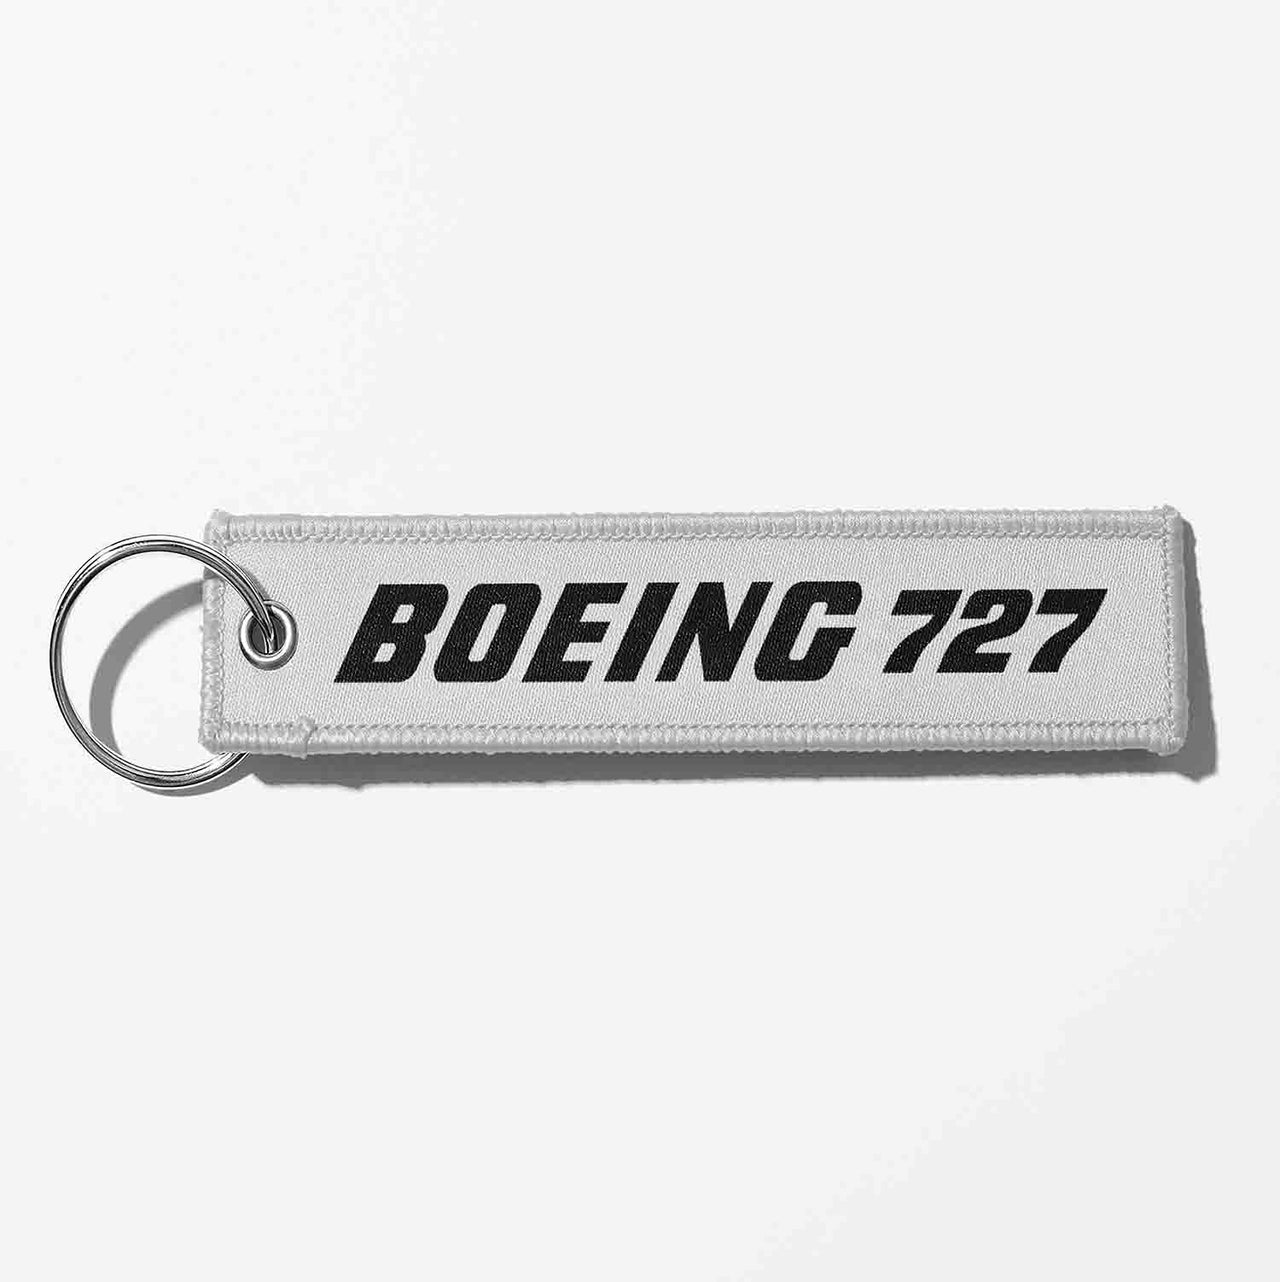 Boeing 727 & Text Designed Key Chains